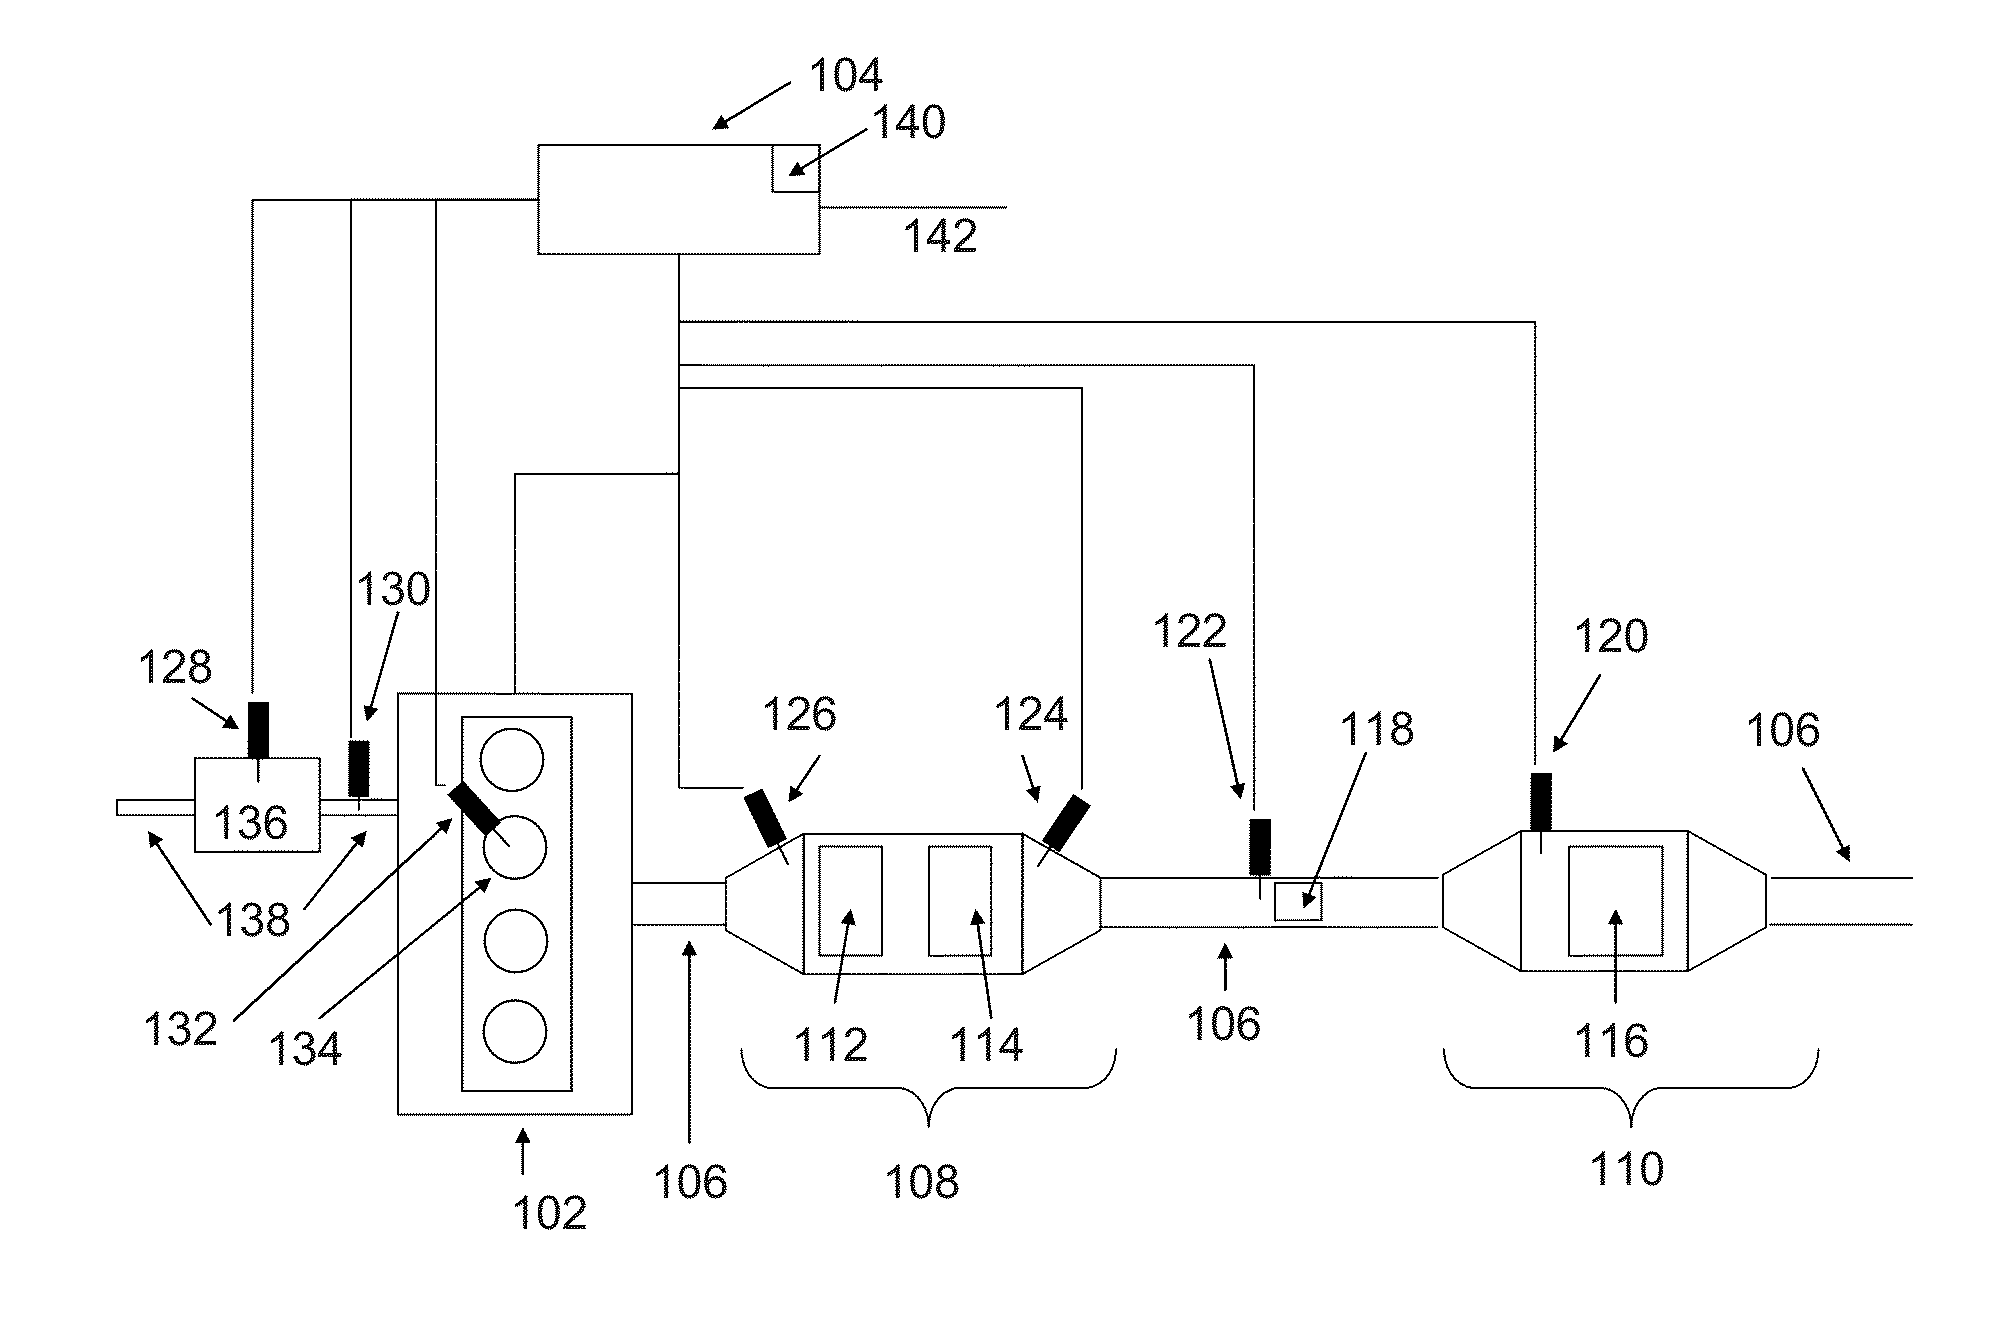 Radio Frequency Process Sensing, Control, And Diagnostics Network